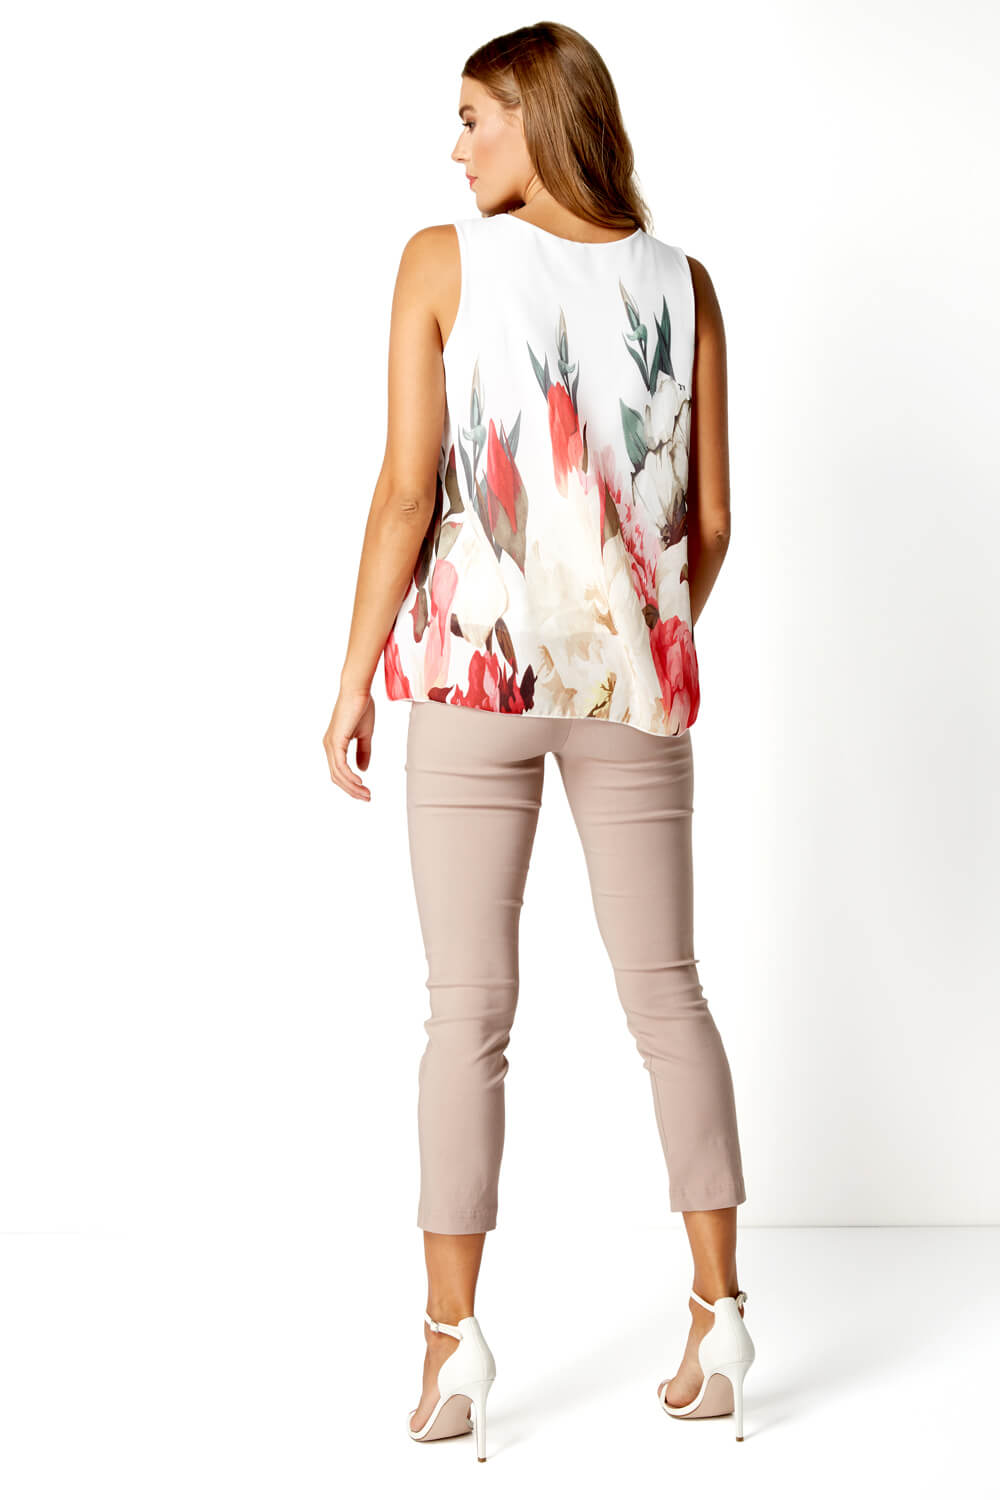 Ivory  Floral Sleeveless Overlay Top, Image 3 of 4